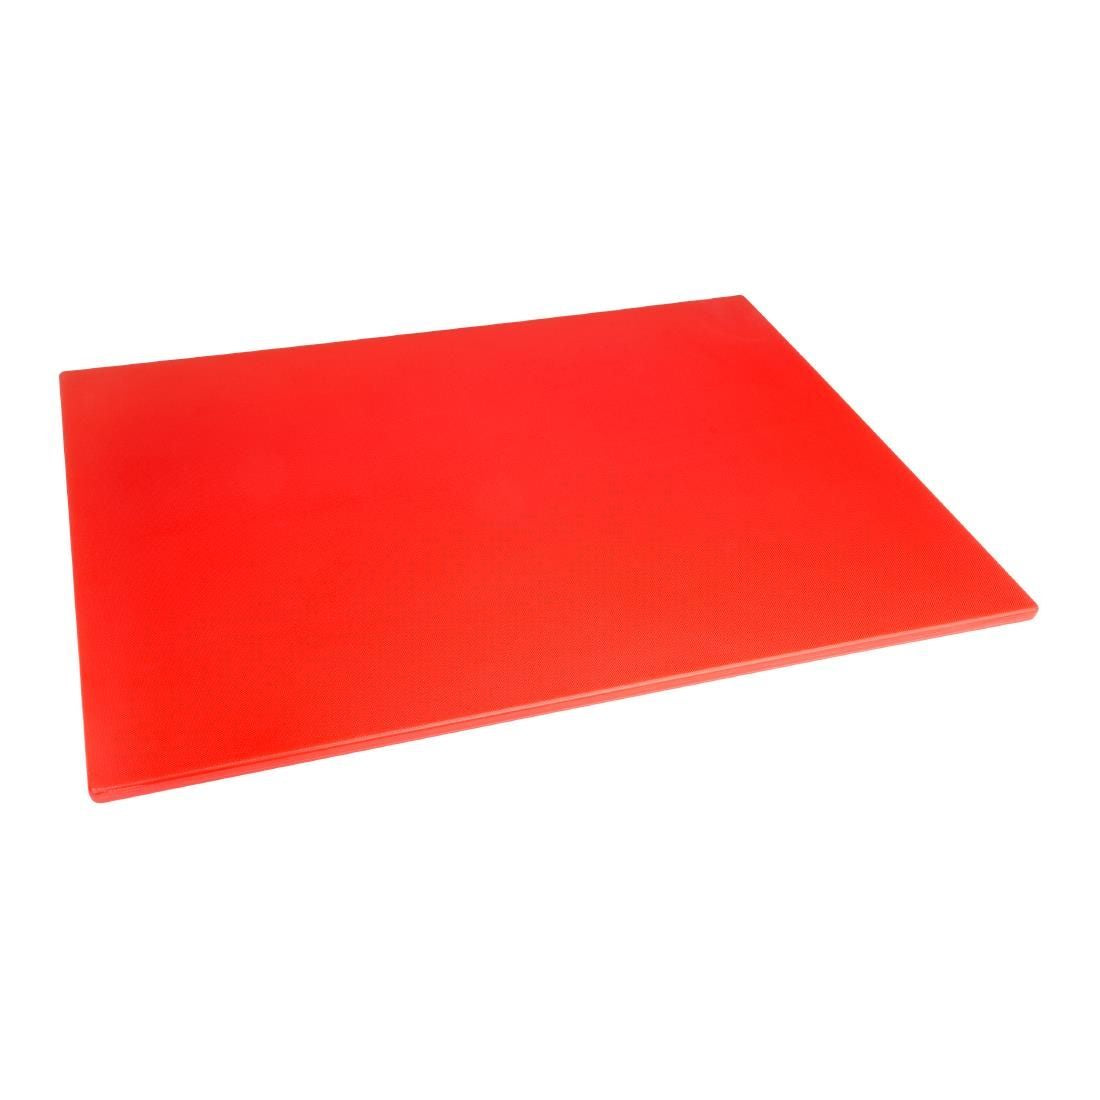 Hygiplas Low Density Red Chopping Board Large JD Catering Equipment Solutions Ltd